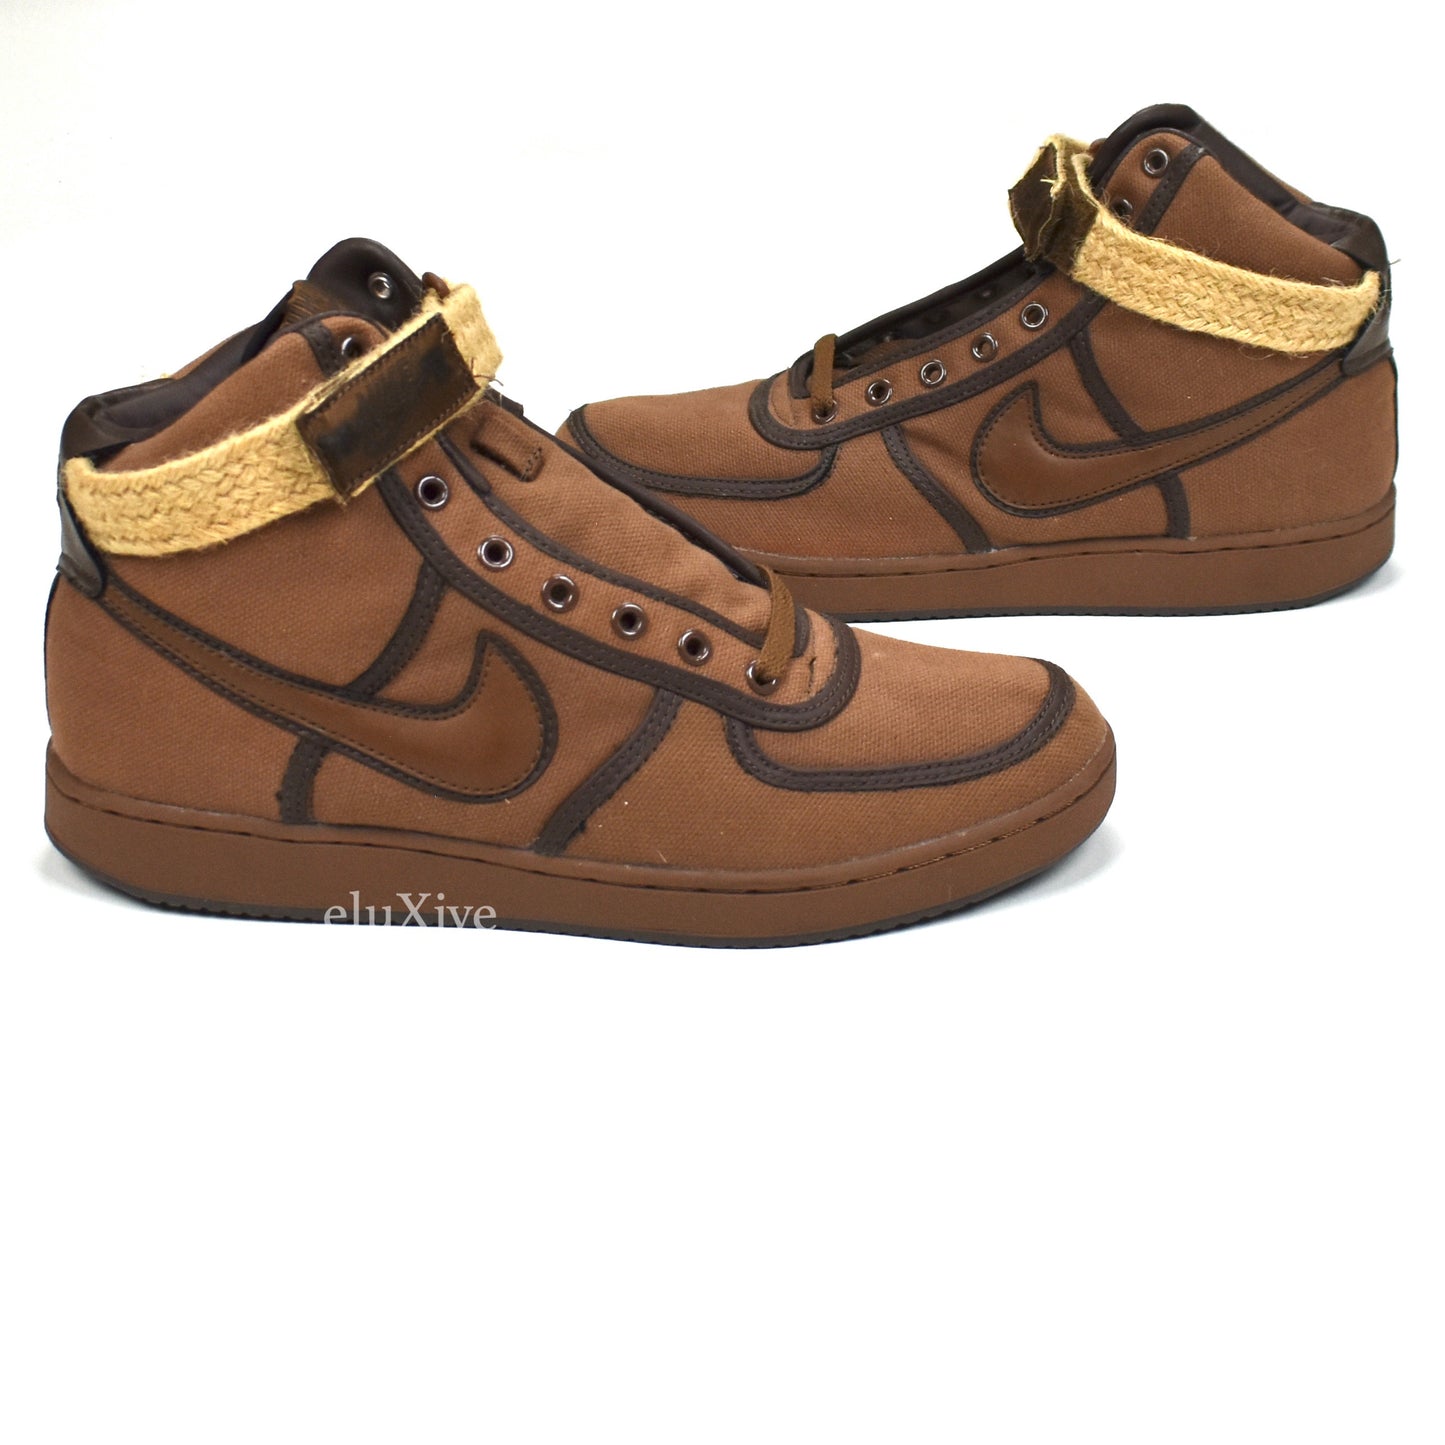 Nike - Vandal High Canvas 'Haight St.' (Bison/Paul Brown)